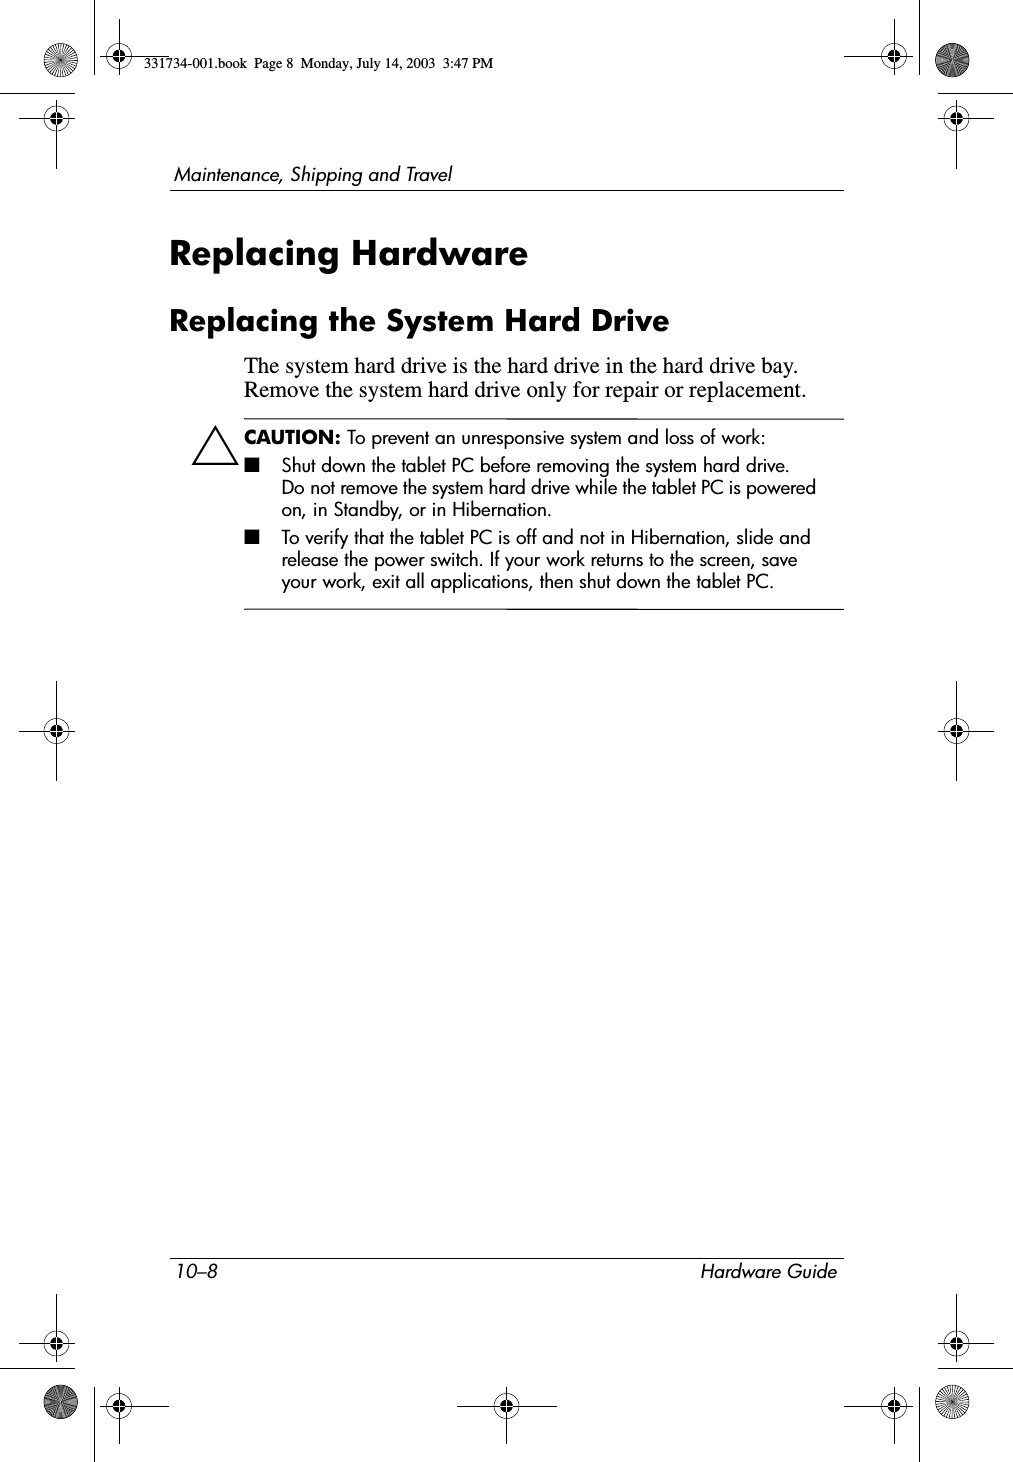 10–8 Hardware GuideMaintenance, Shipping and TravelReplacing HardwareReplacing the System Hard DriveThe system hard drive is the hard drive in the hard drive bay. Remove the system hard drive only for repair or replacement.ÄCAUTION: To prevent an unresponsive system and loss of work:■Shut down the tablet PC before removing the system hard drive. Do not remove the system hard drive while the tablet PC is powered on, in Standby, or in Hibernation.■To verify that the tablet PC is off and not in Hibernation, slide and release the power switch. If your work returns to the screen, save your work, exit all applications, then shut down the tablet PC.331734-001.book  Page 8  Monday, July 14, 2003  3:47 PM